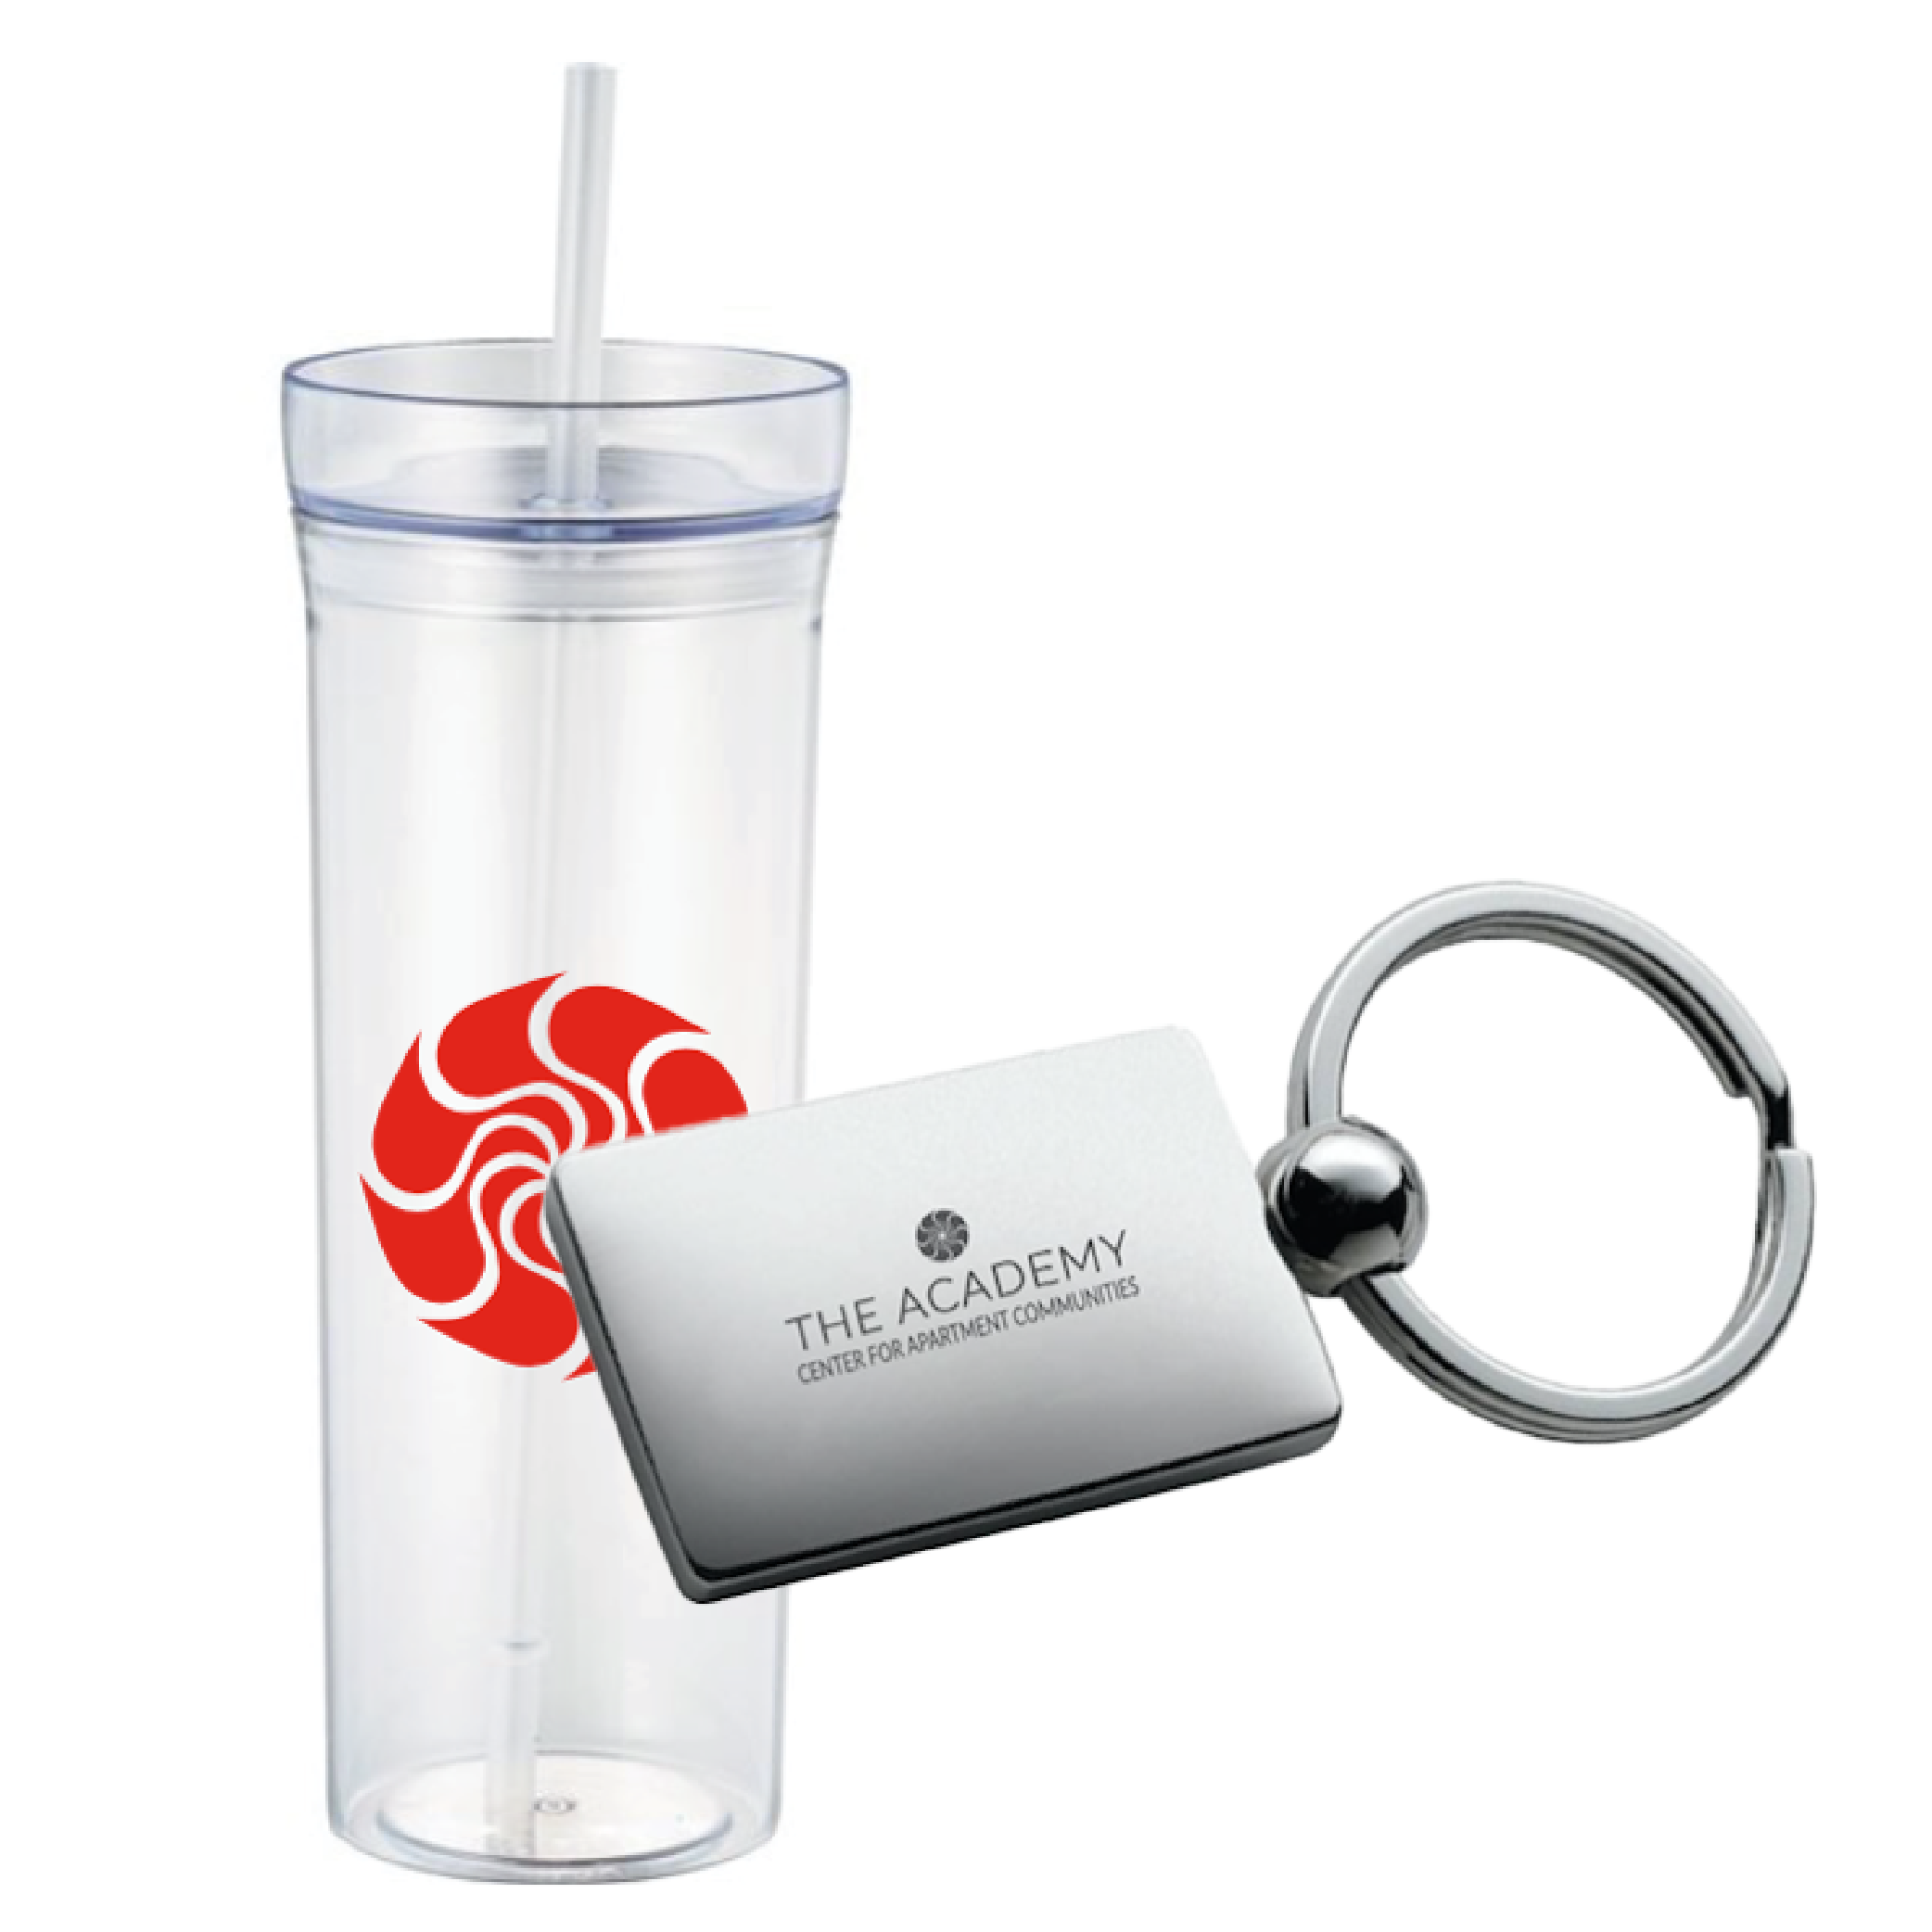 Promotional cup and keychain